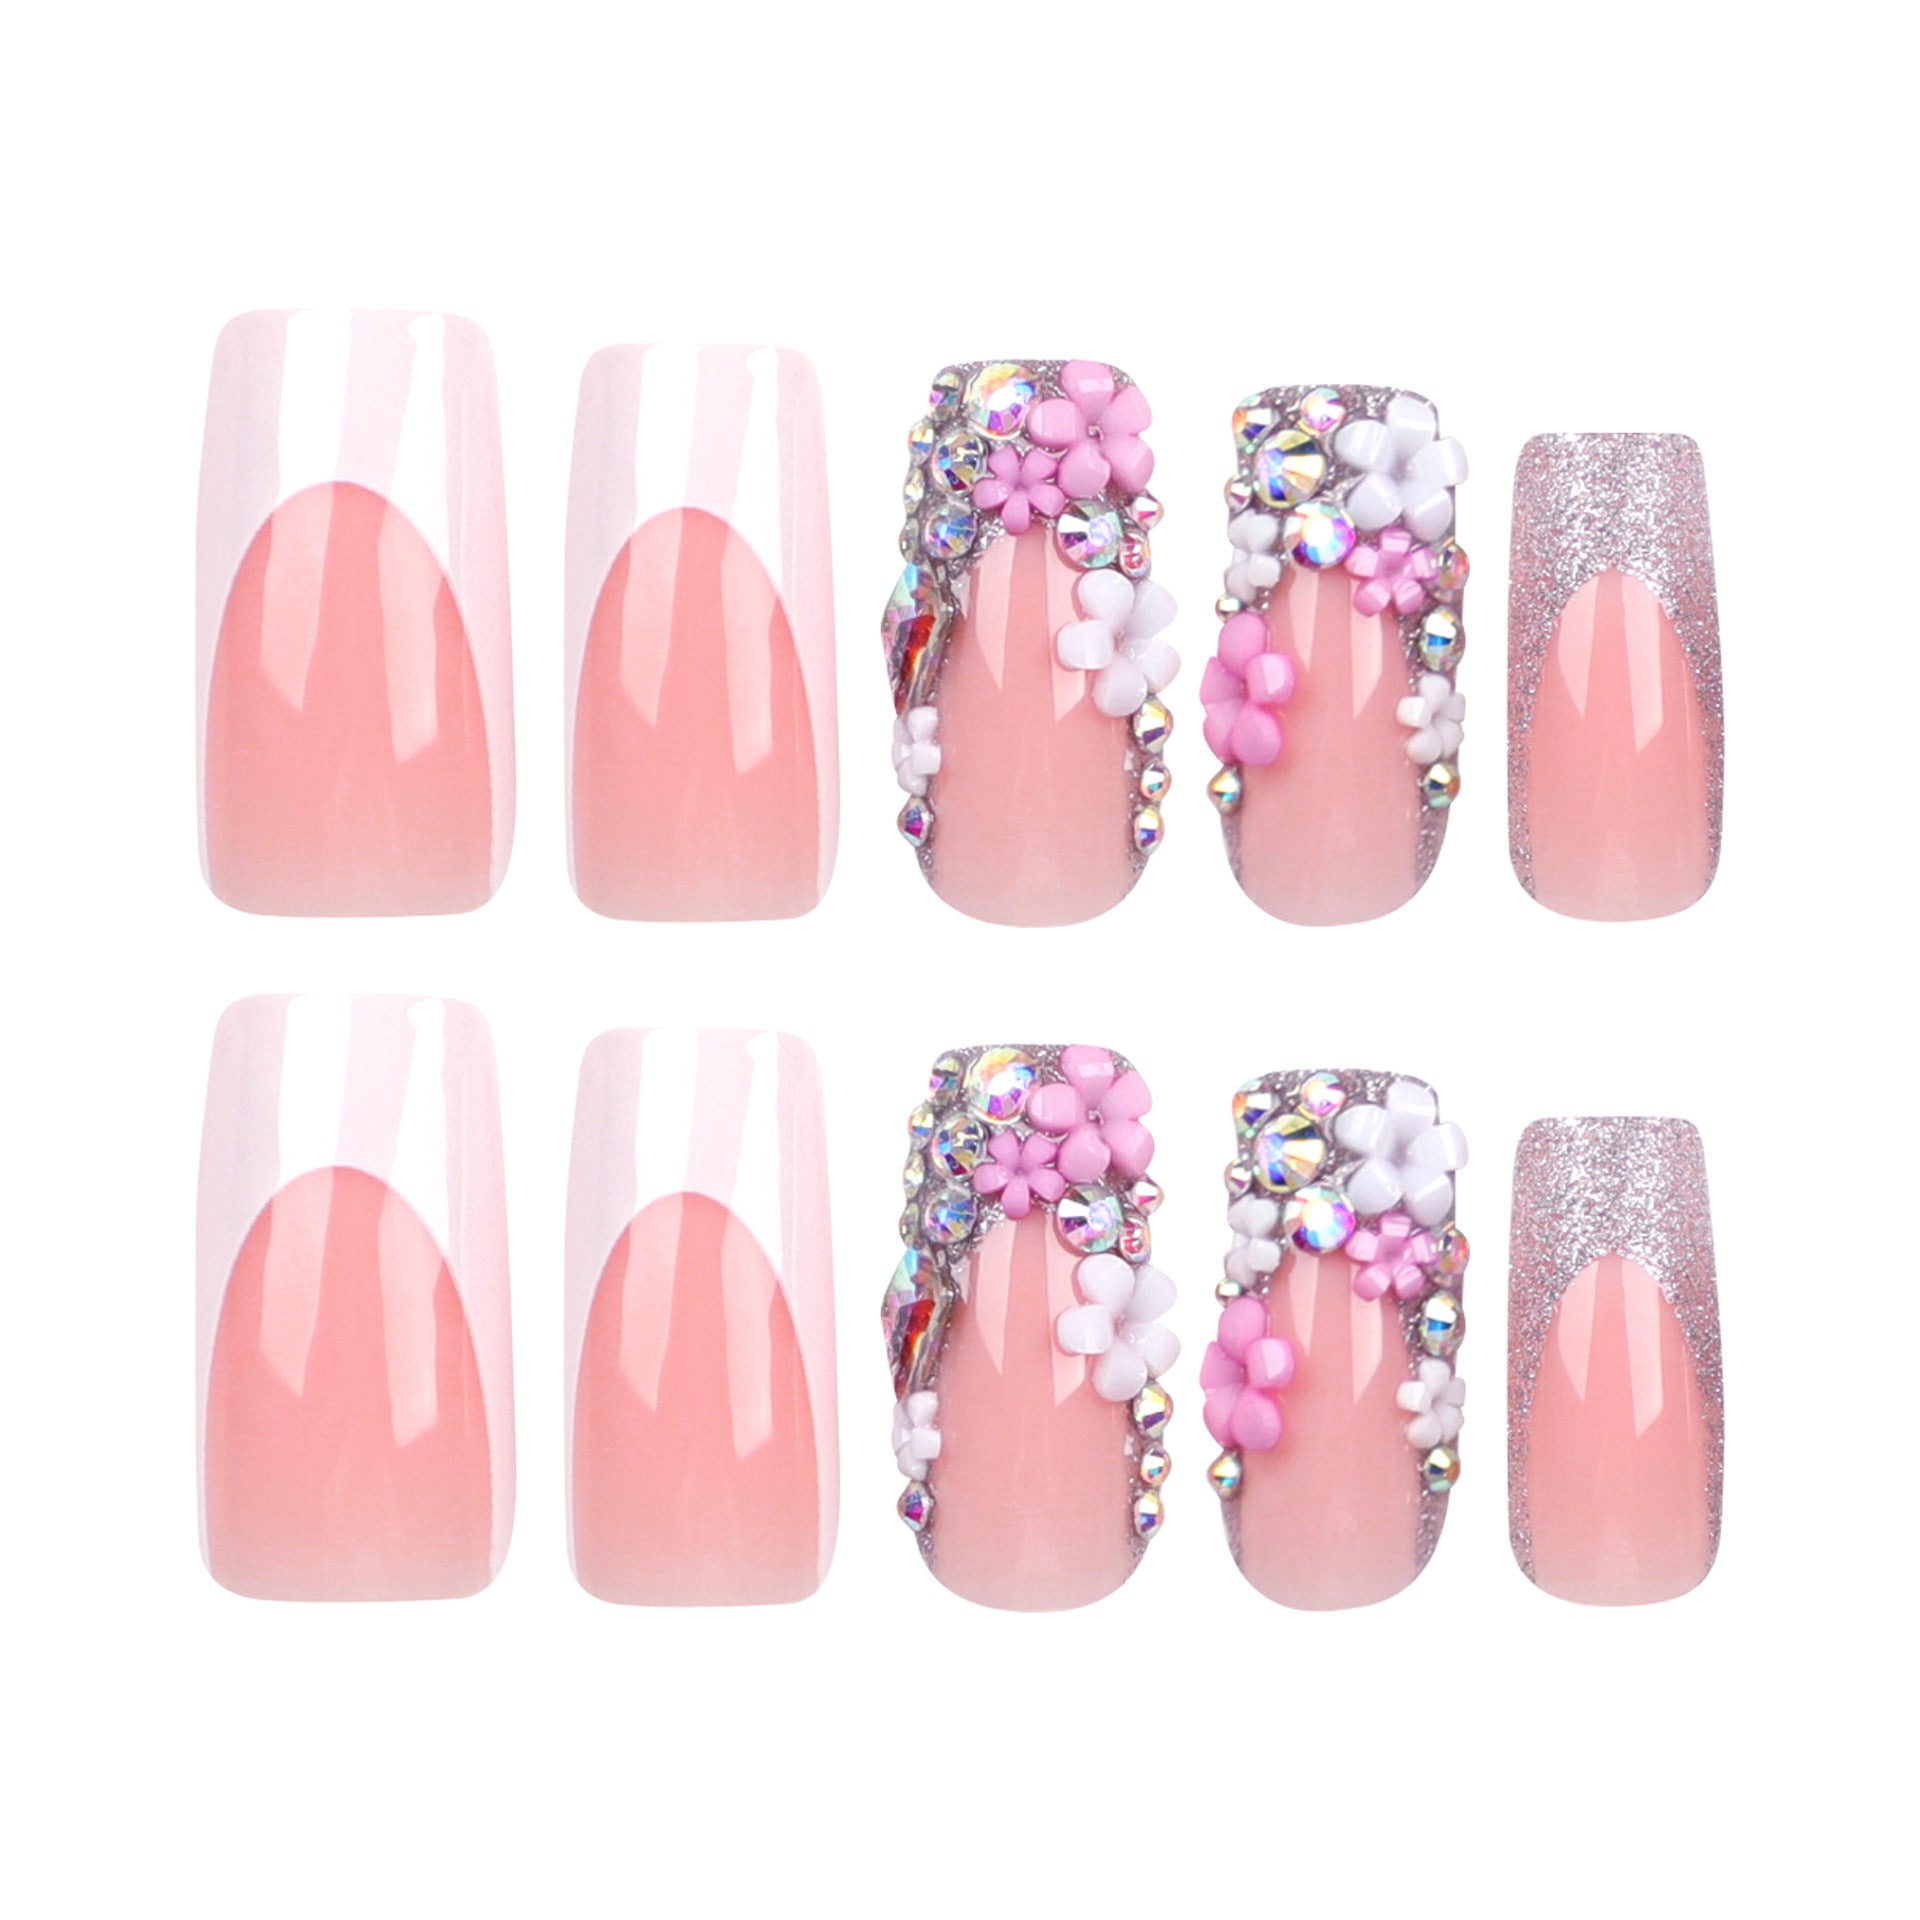 Beads Press on Nails | Square Shape Nails | Galspro